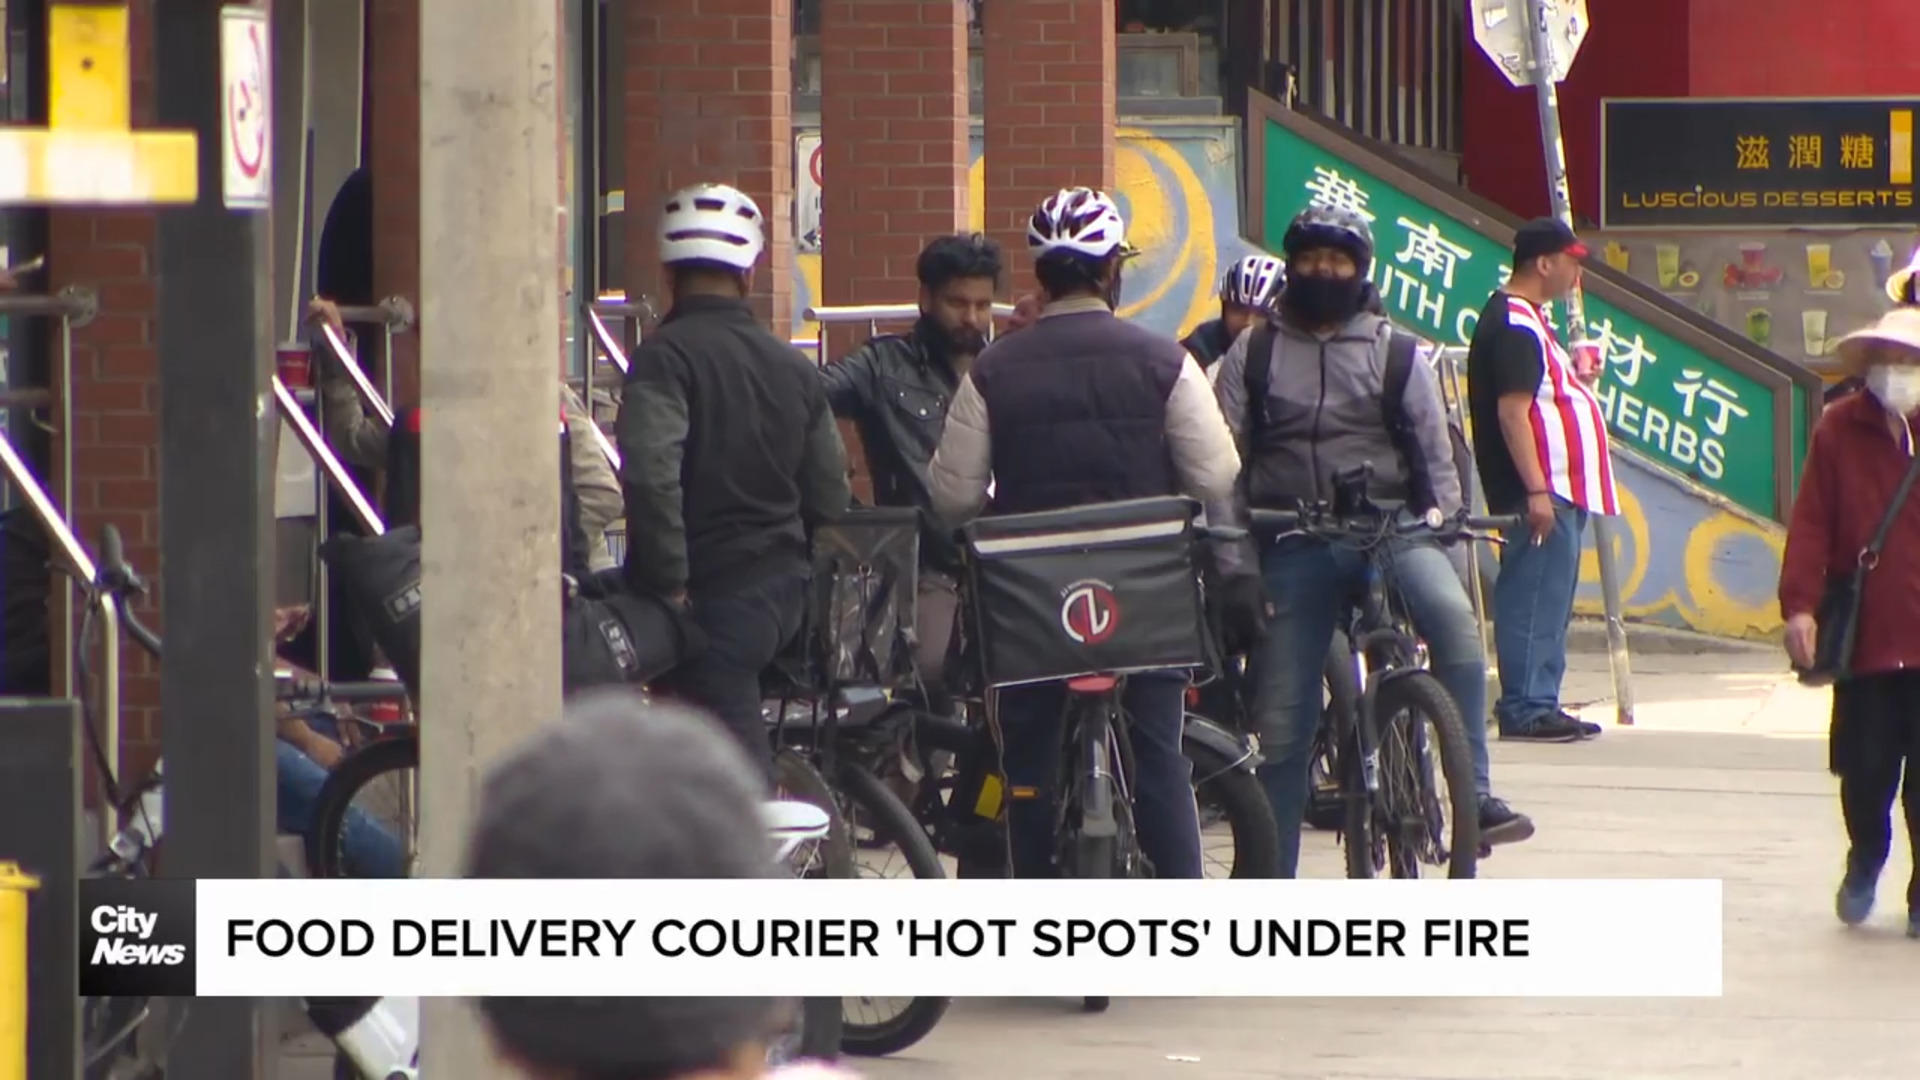 Food delivery courier “hot spots” outside businesses under fire